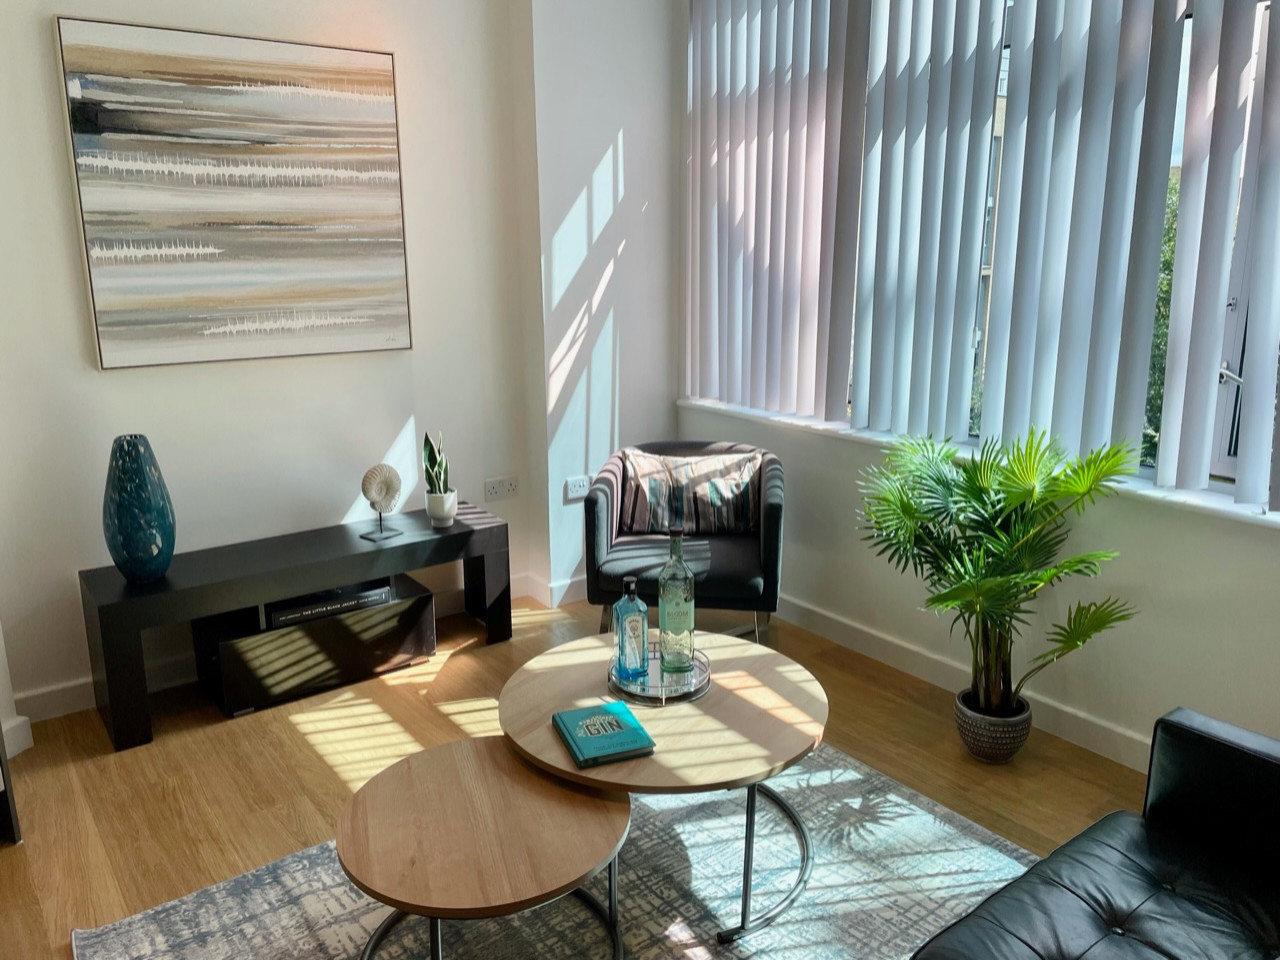 One Bedroom flat in Canary Wharf - Staged for Rental